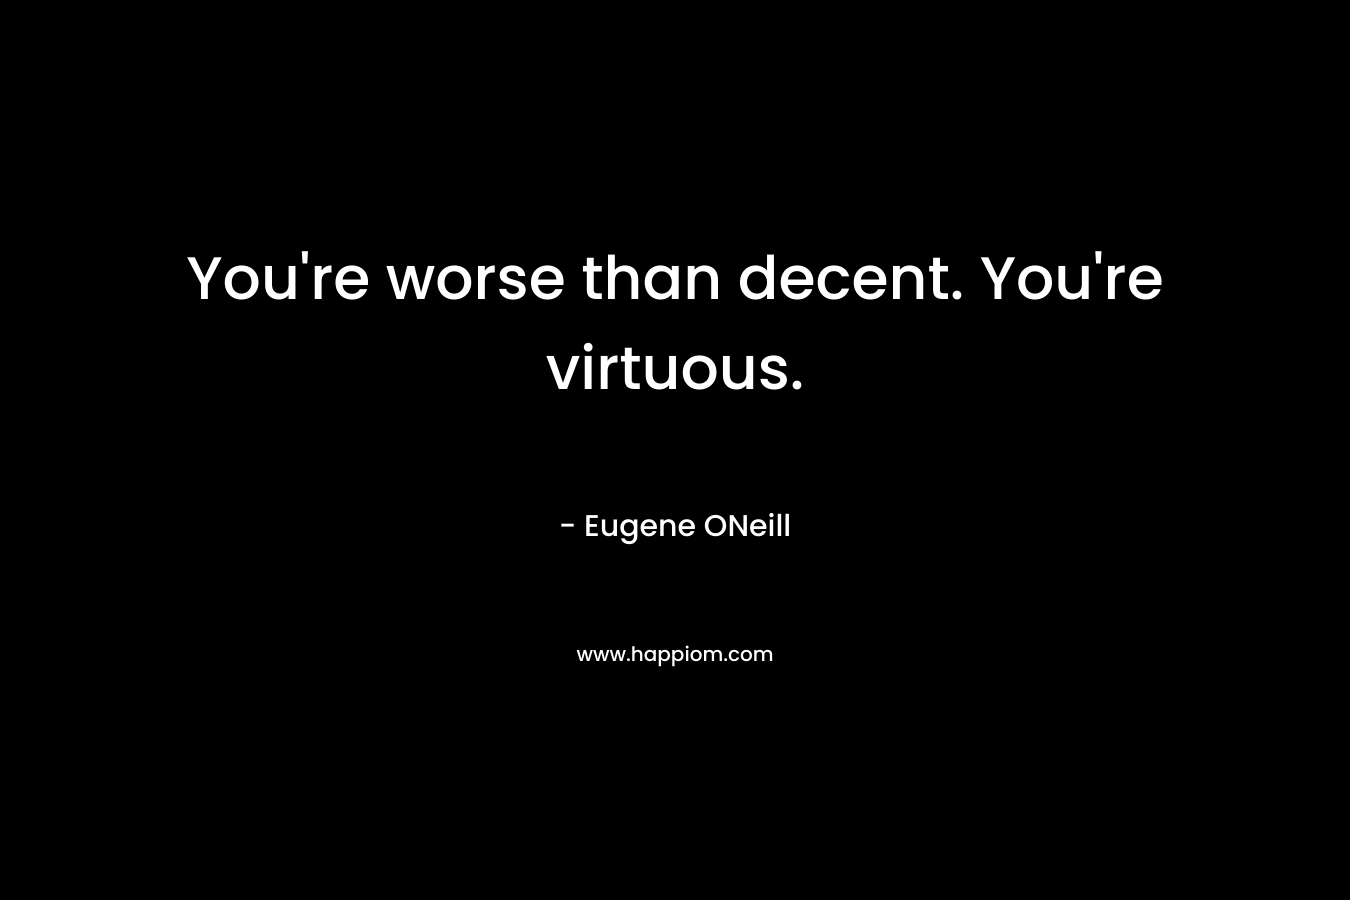 You’re worse than decent. You’re virtuous. – Eugene ONeill